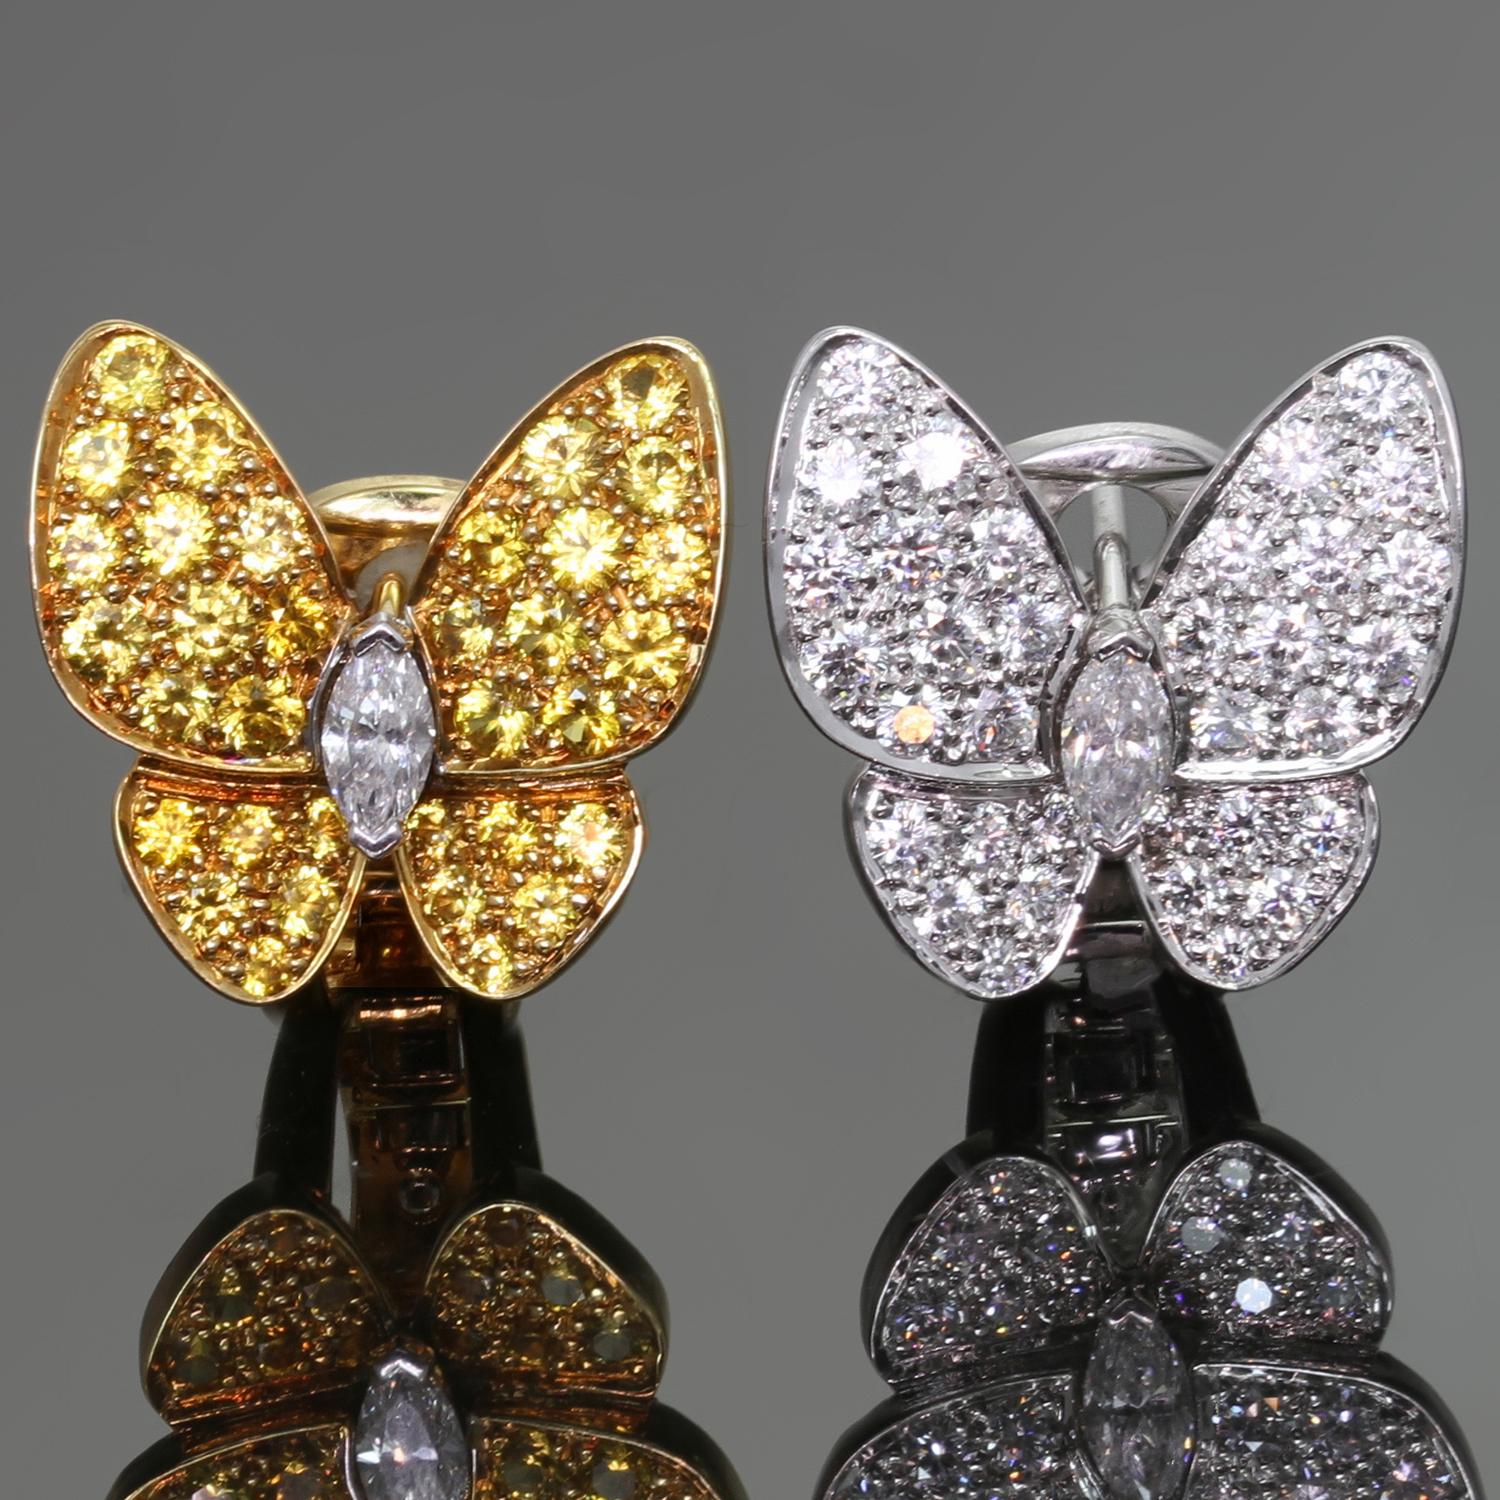 These exquisite Van Cleef & Arpels earrings feature a classic butterfly design with one earring crafted in 18k yellow gold and set with yellow sapphire gemstones weighing an estimated 0.88 carats and another earring crafted in 18k white gold and set